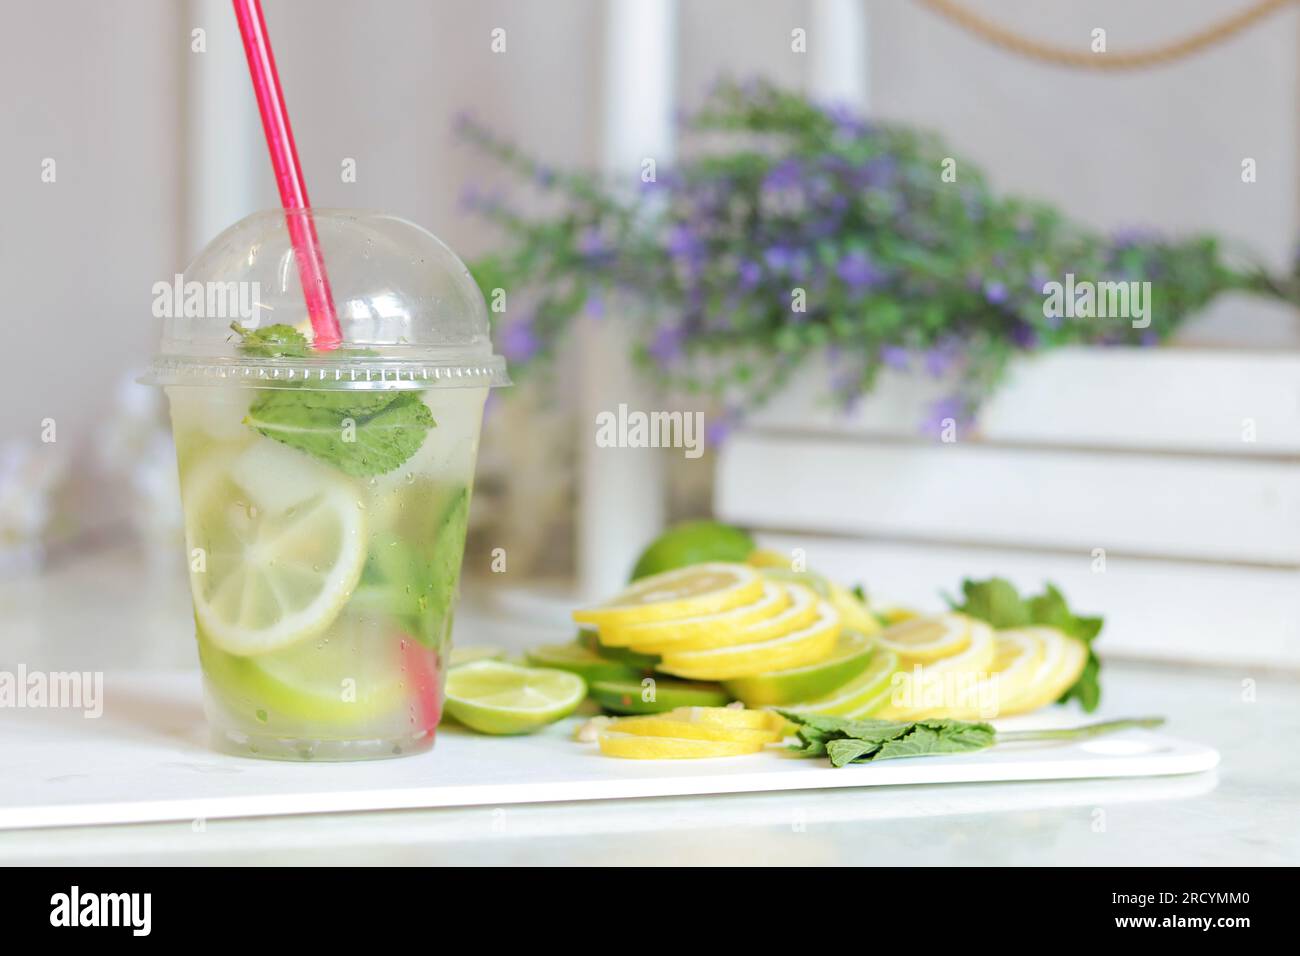 https://c8.alamy.com/comp/2RCYMM0/making-homemade-mojitos-close-up-of-a-glass-with-ice-lemon-lime-and-mint-lemonade-preparation-a-plastic-cup-with-a-mojito-on-a-table-in-a-light-k-2RCYMM0.jpg